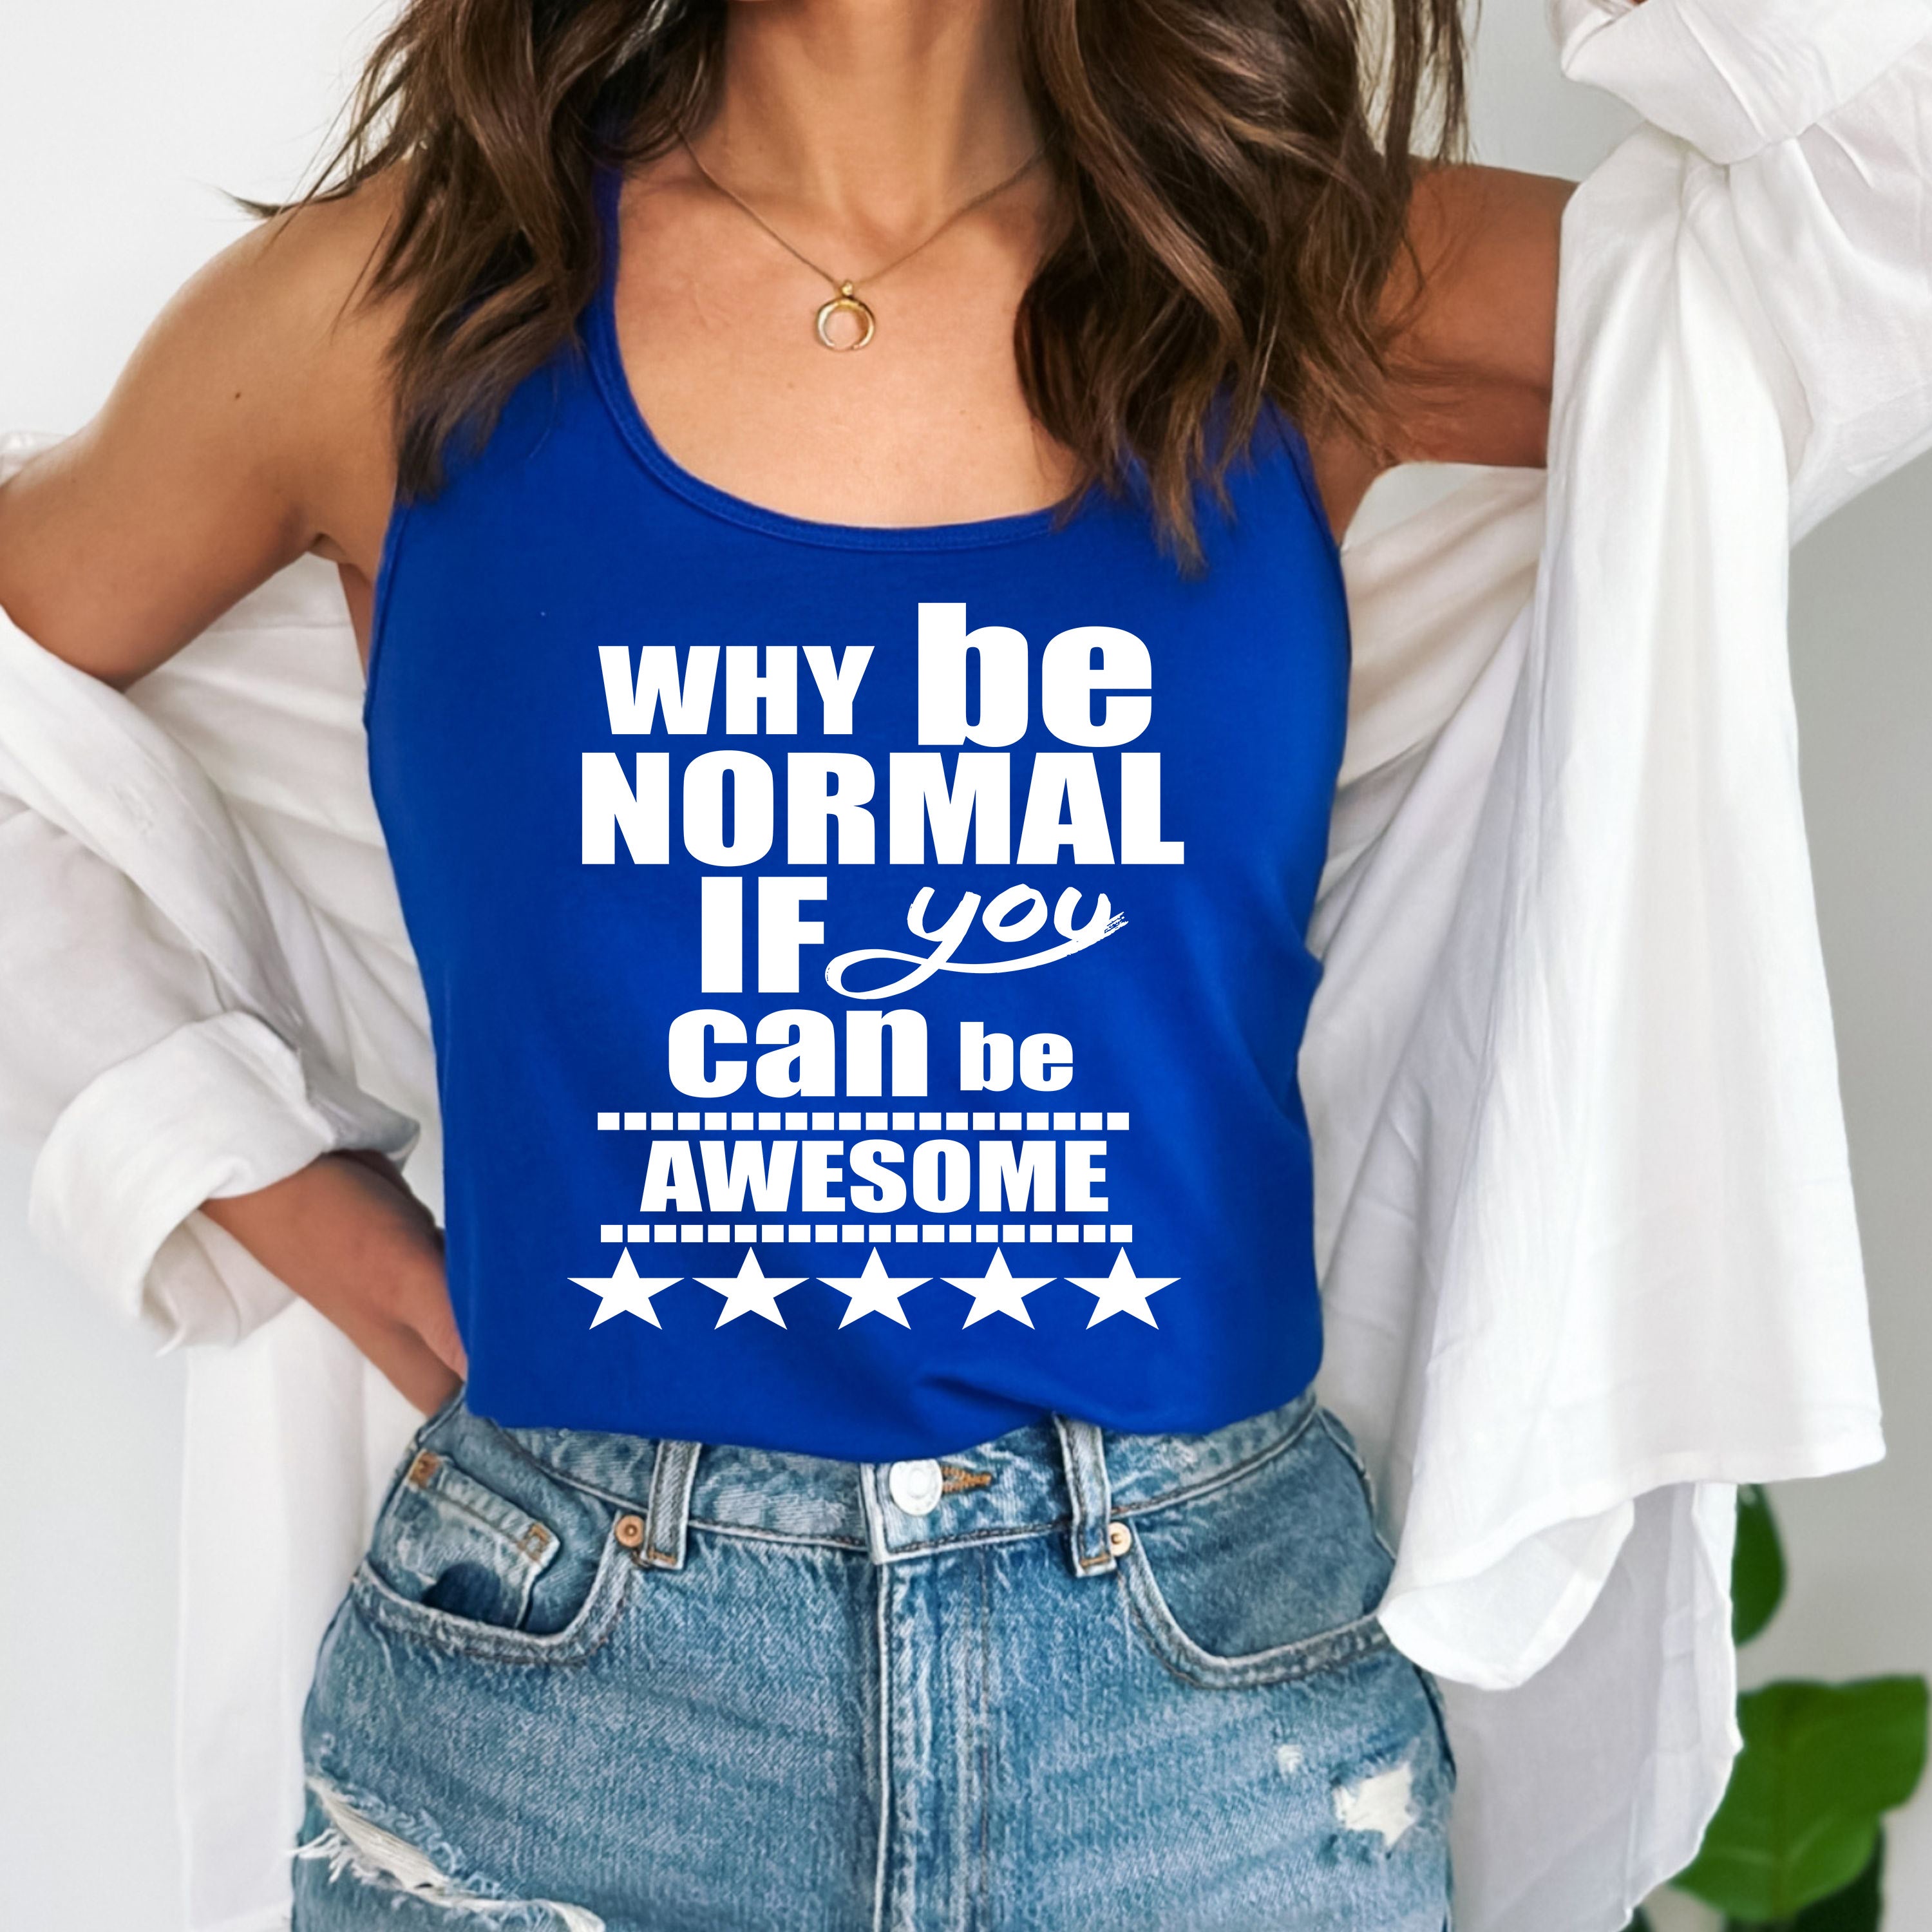 "WHY BE NORMAL IF YOU CAN BE AWESOME"